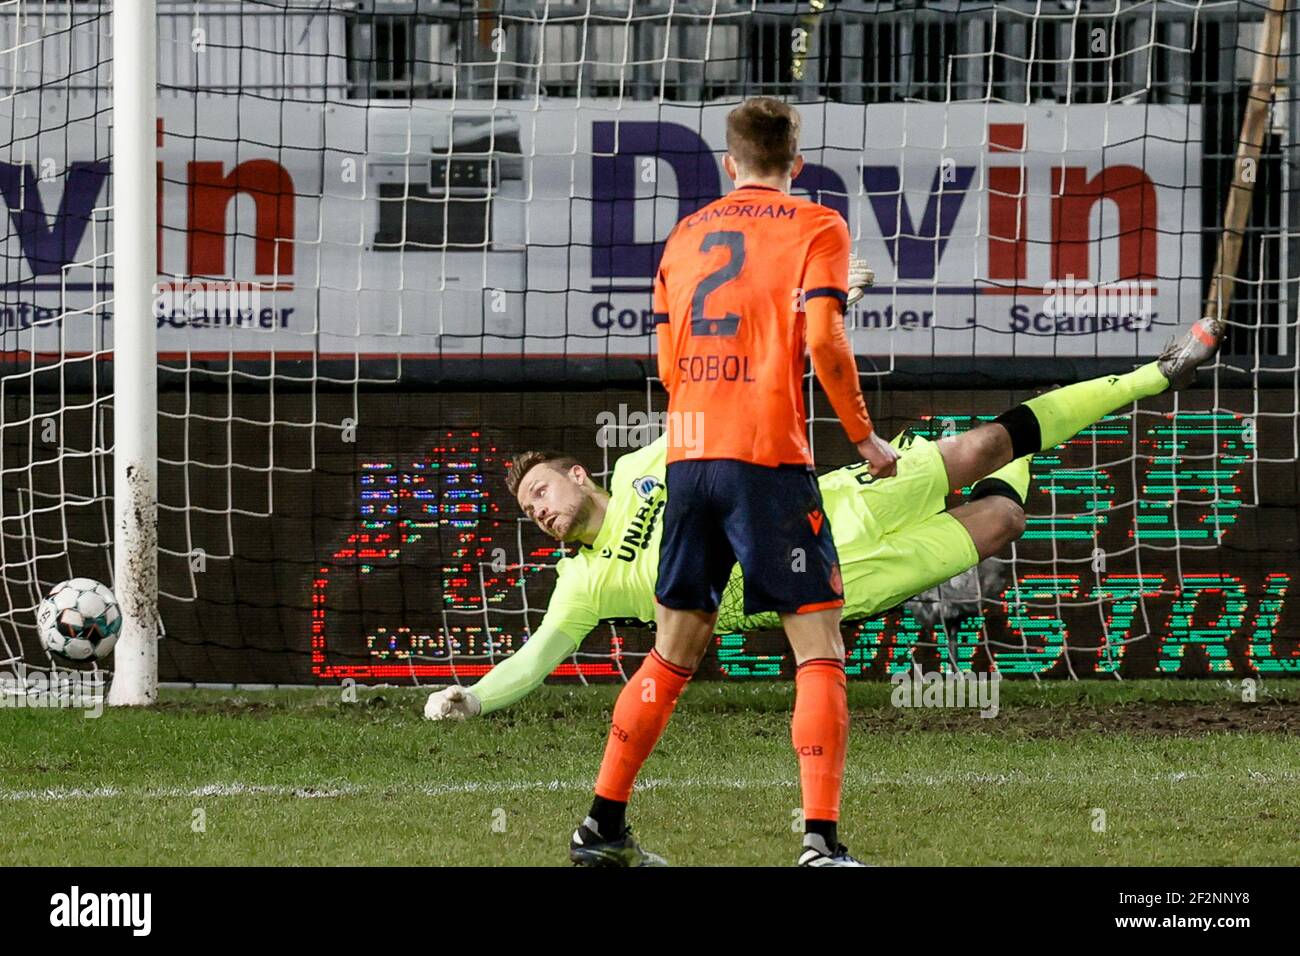 Club's goalkeeper Simon Mignolet pictured in action during a postponed soccer match between Sporting Charleroi and Club Brugge KV, Friday 12 March 202 Stock Photo